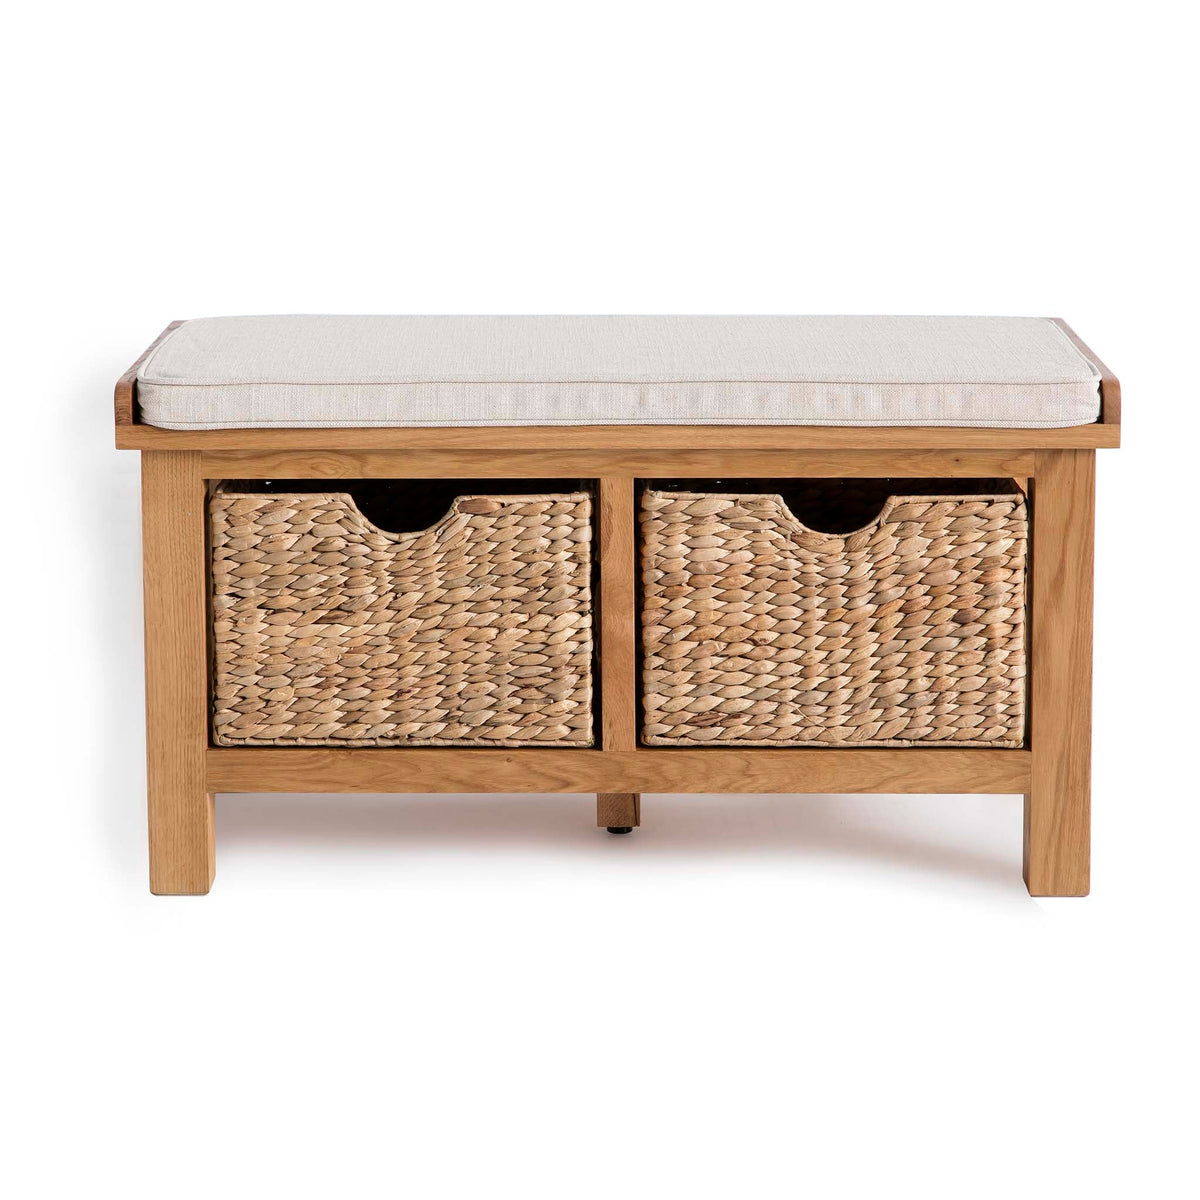 Surrey Oak Hall Bench with Baskets by Roseland Furniture